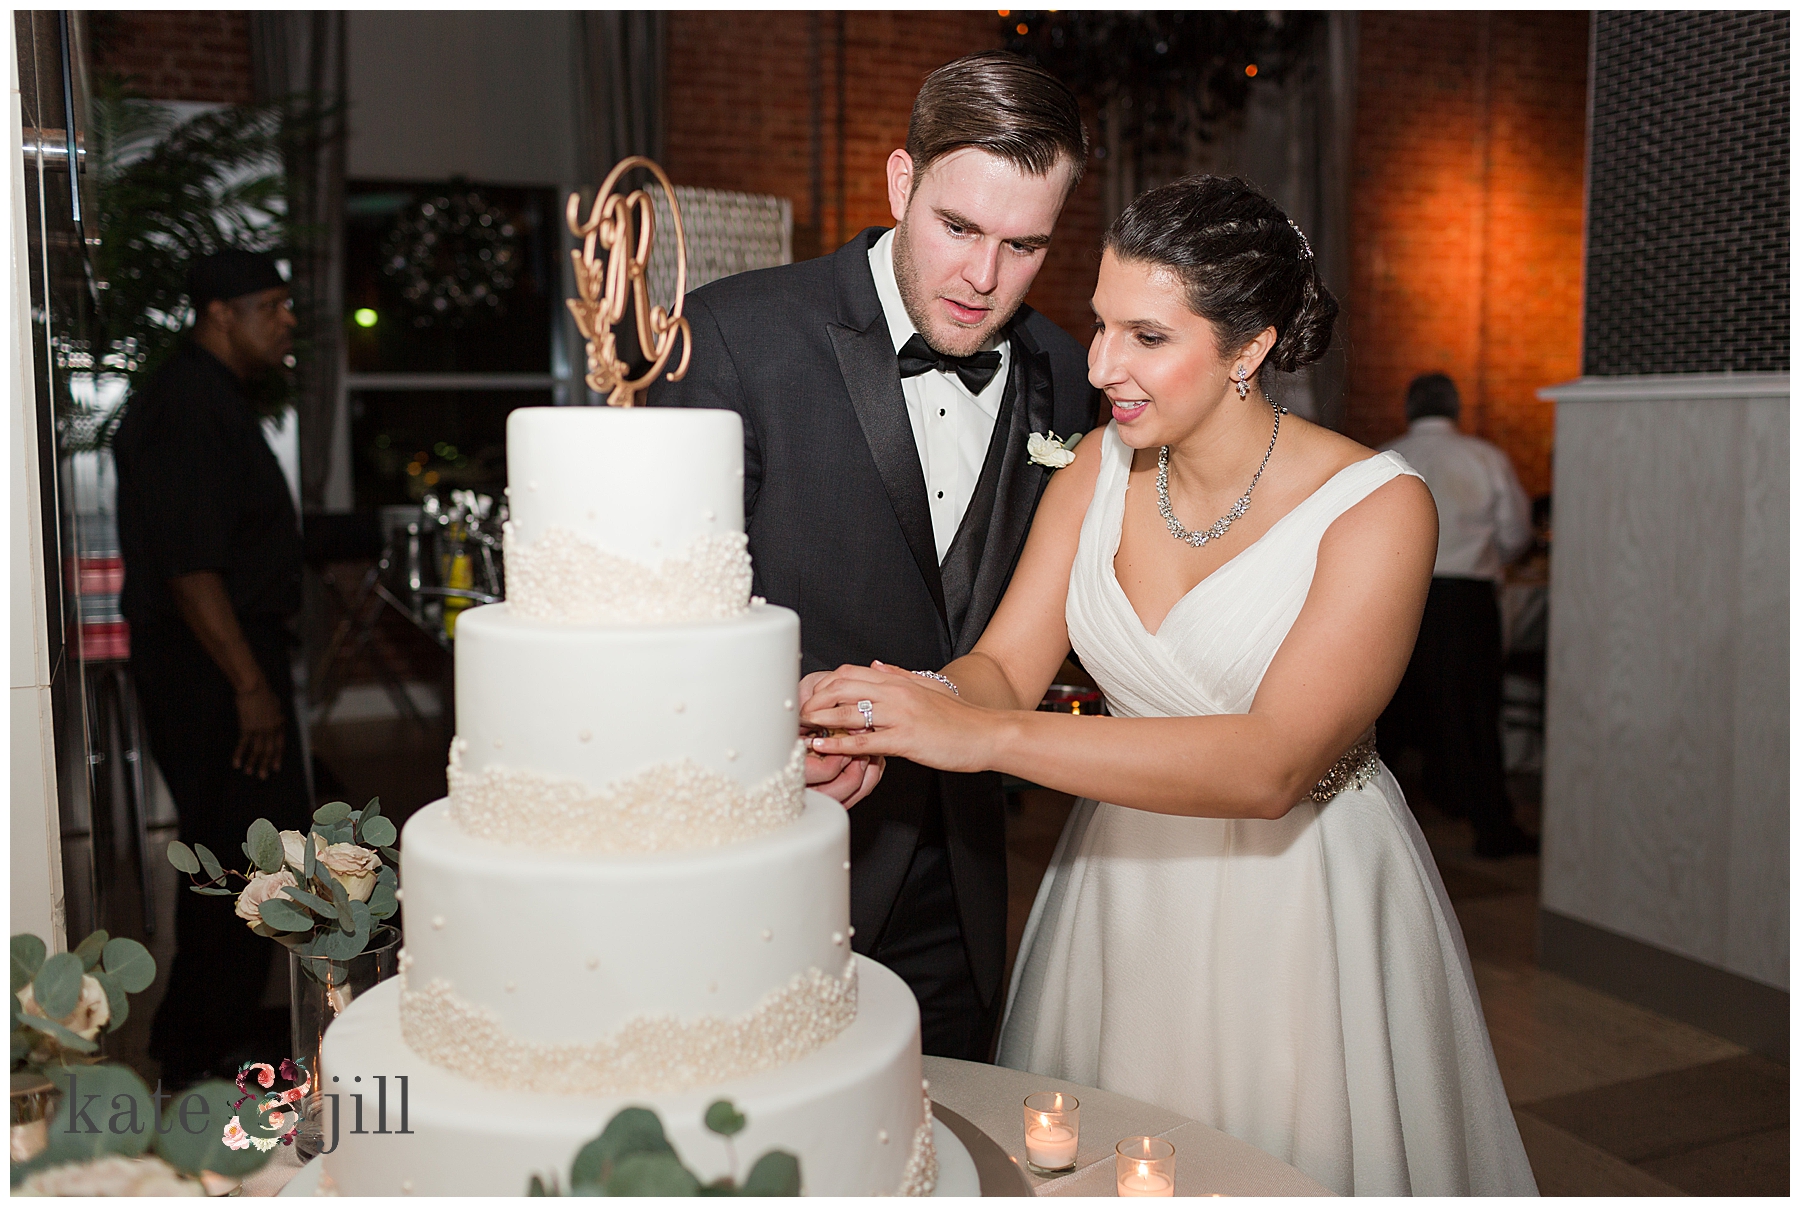 bride and groom cutting cake 